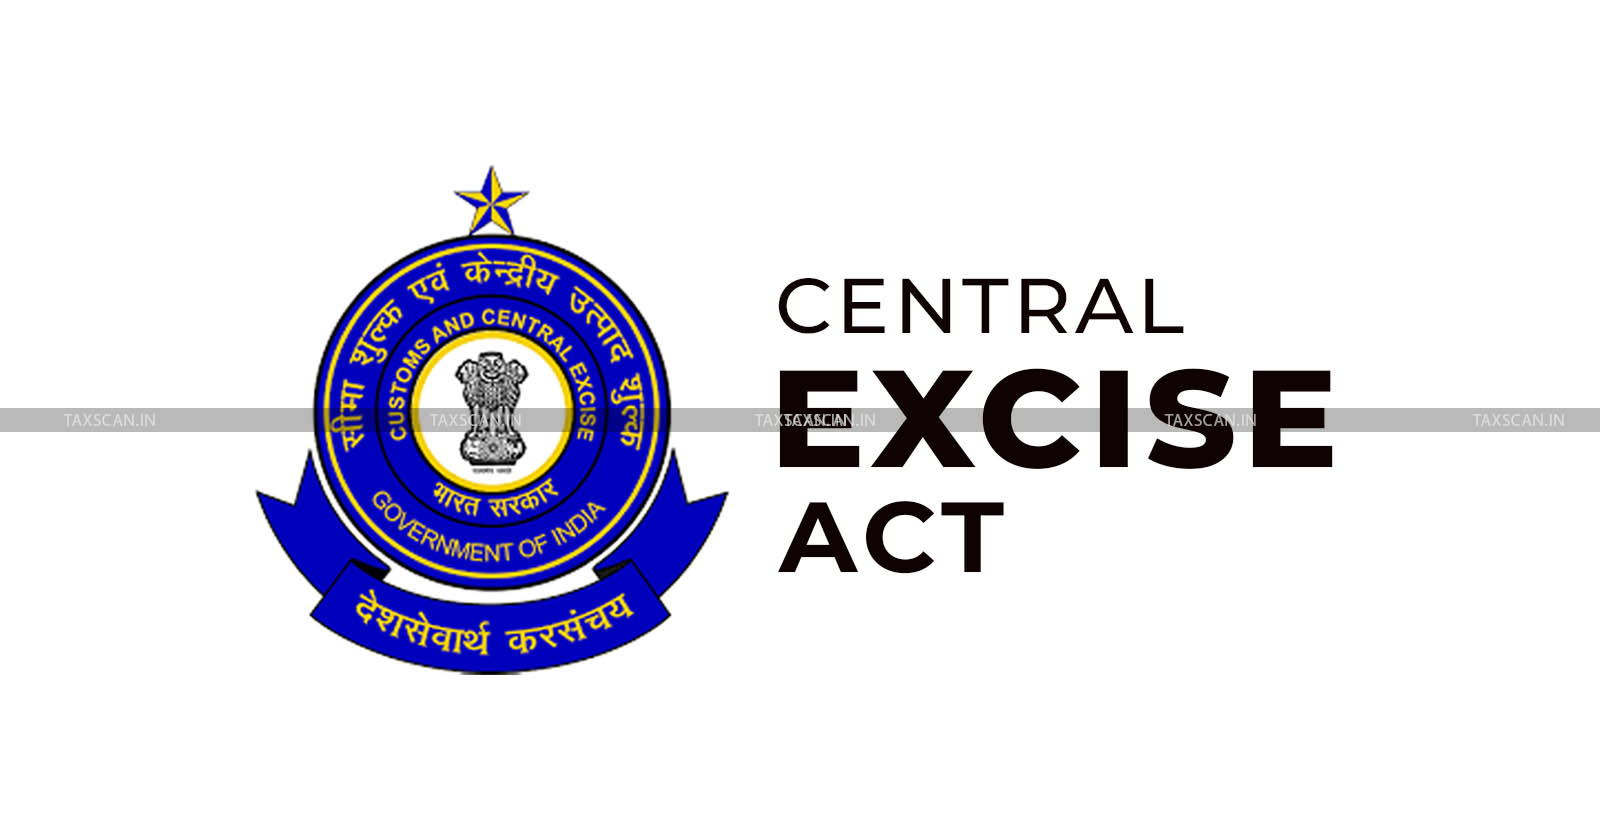 CESTAT - Central Excise Act - Ahmedabad bench - Affixing on factory gate - taxscan